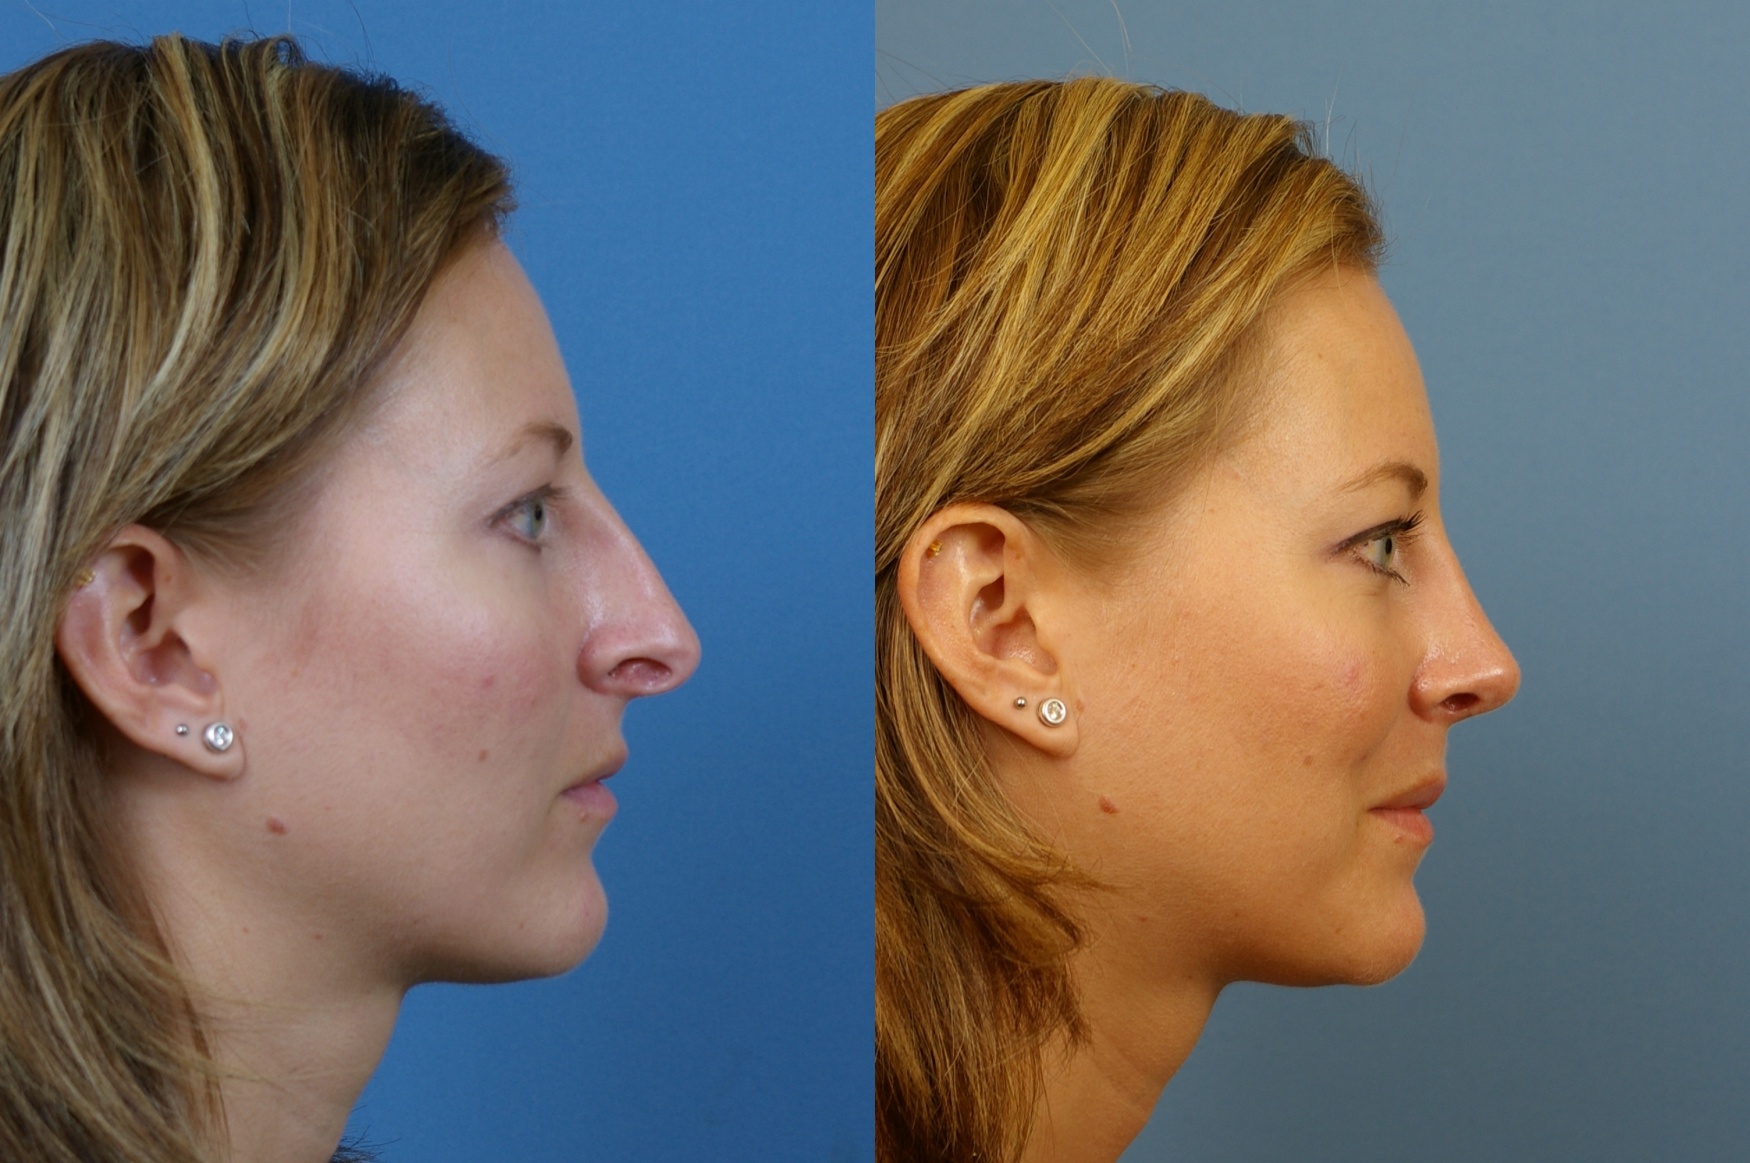 Having a Perfect Nose has Never Been Easier